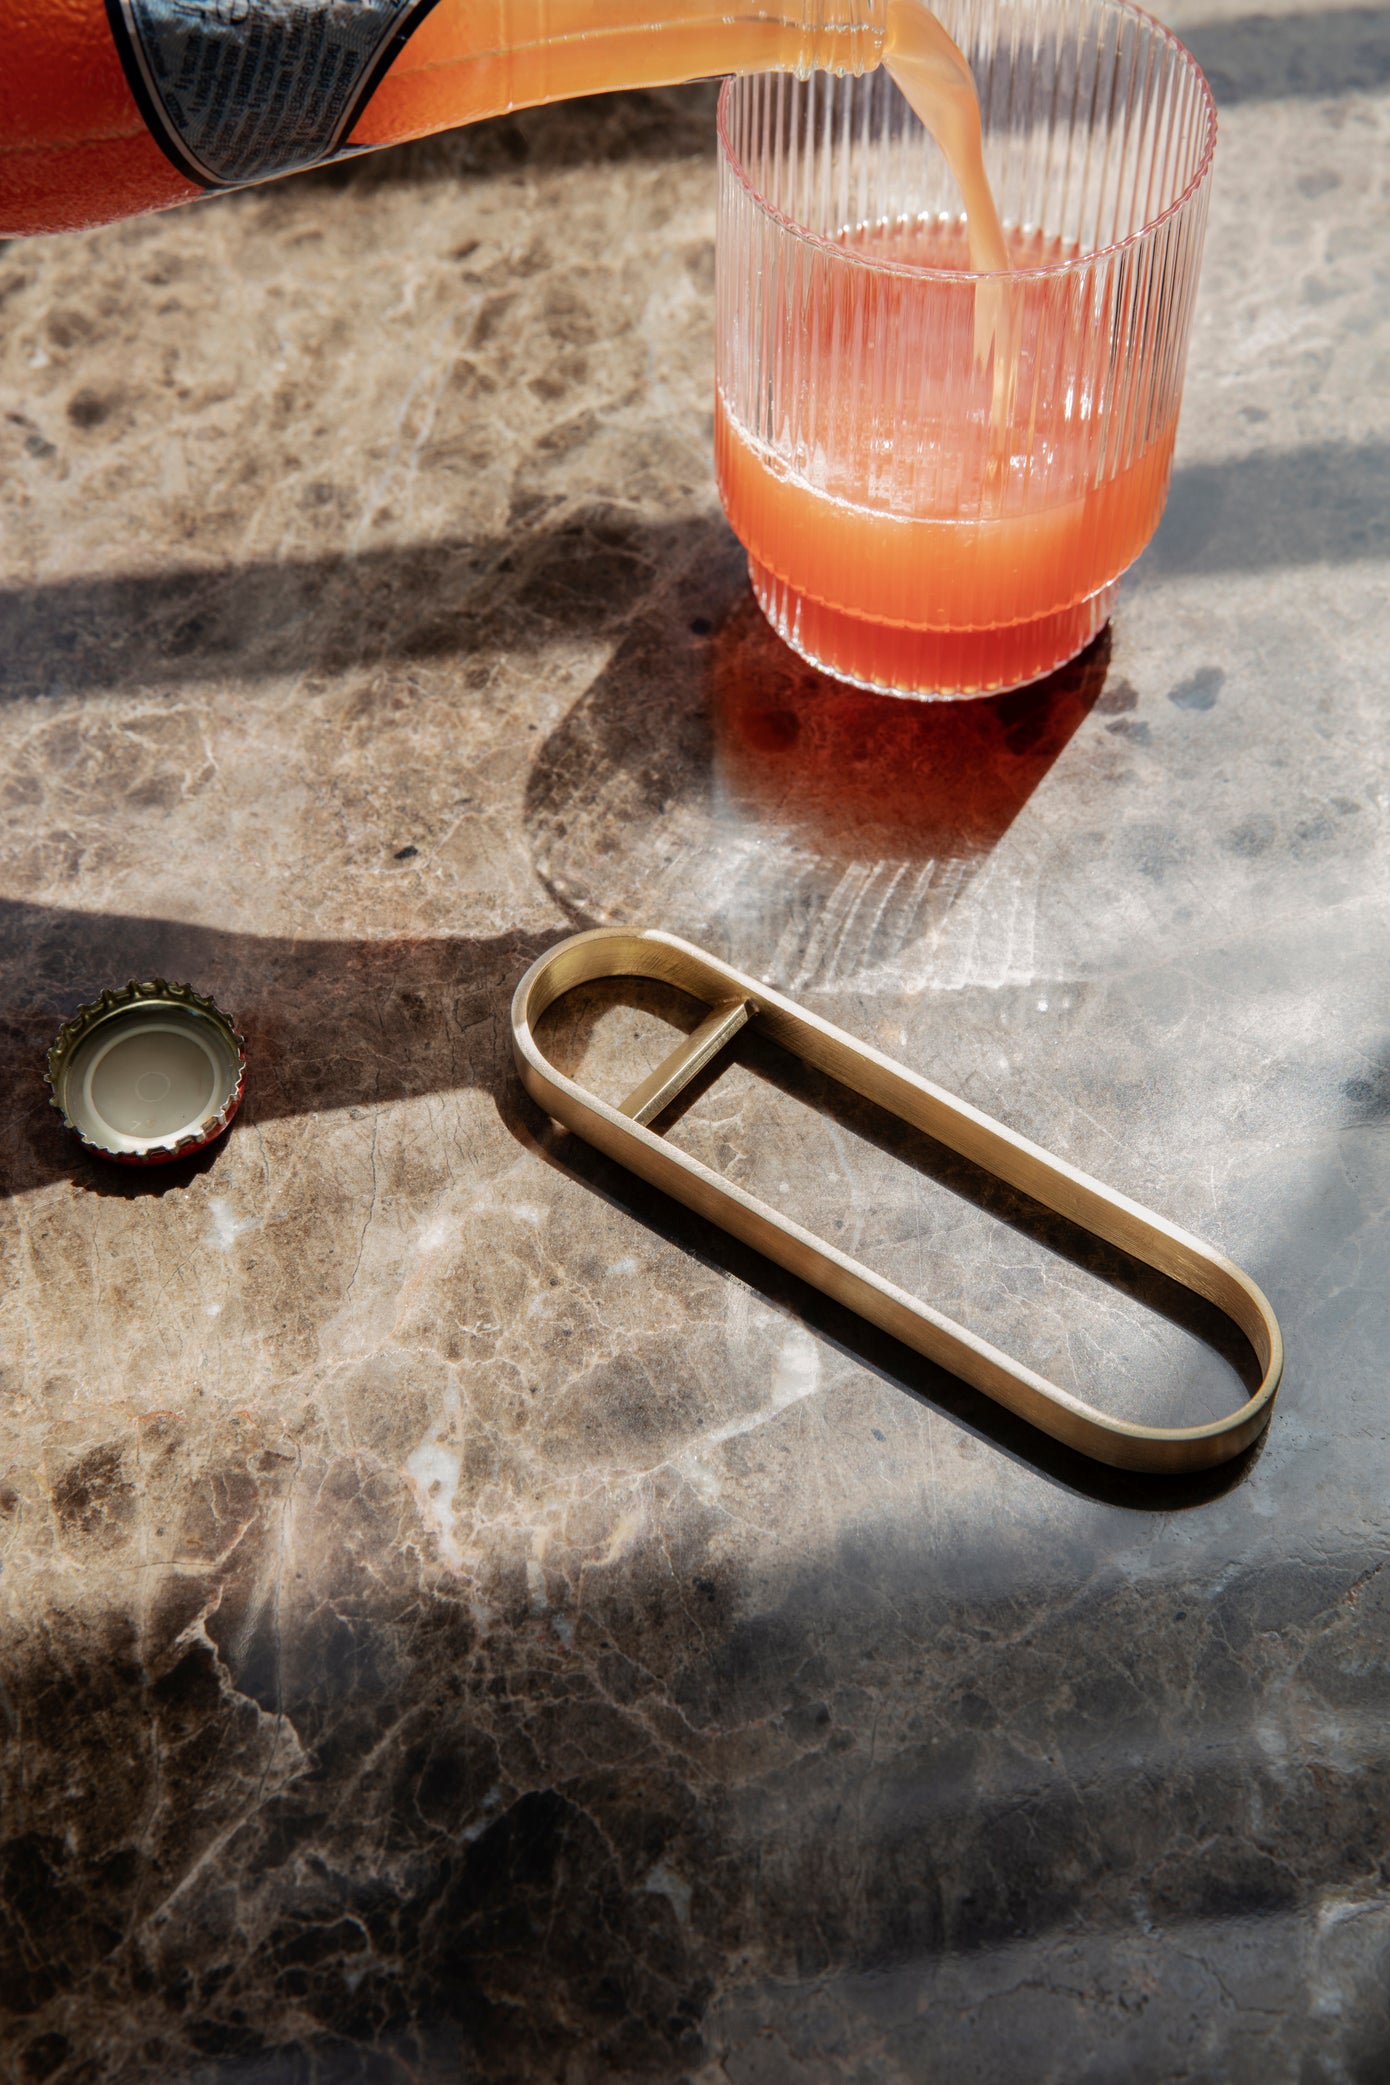 The Fein brass bottle opener lying on a marble tabletop with a ripple glass filled with juice